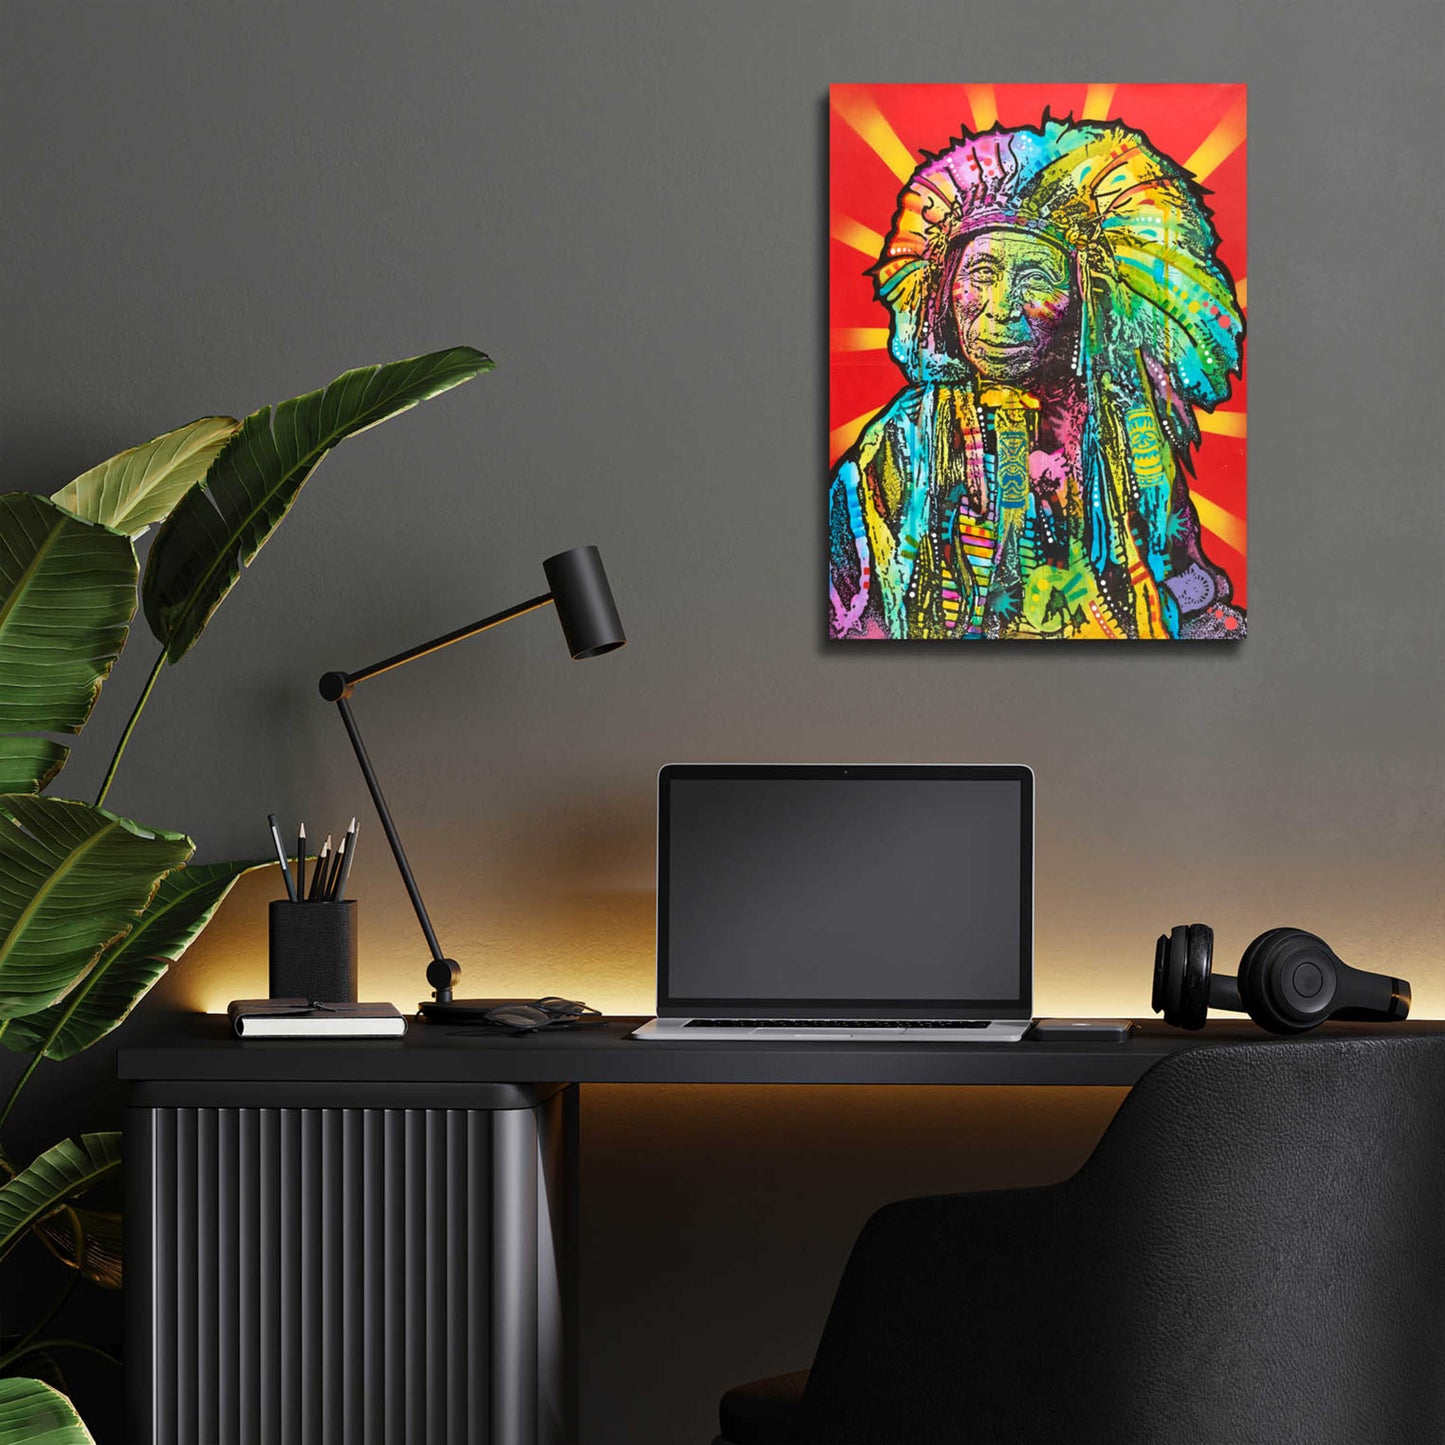 Epic Art 'Native American I' by Dean Russo, Acrylic Glass Wall Art,12x16